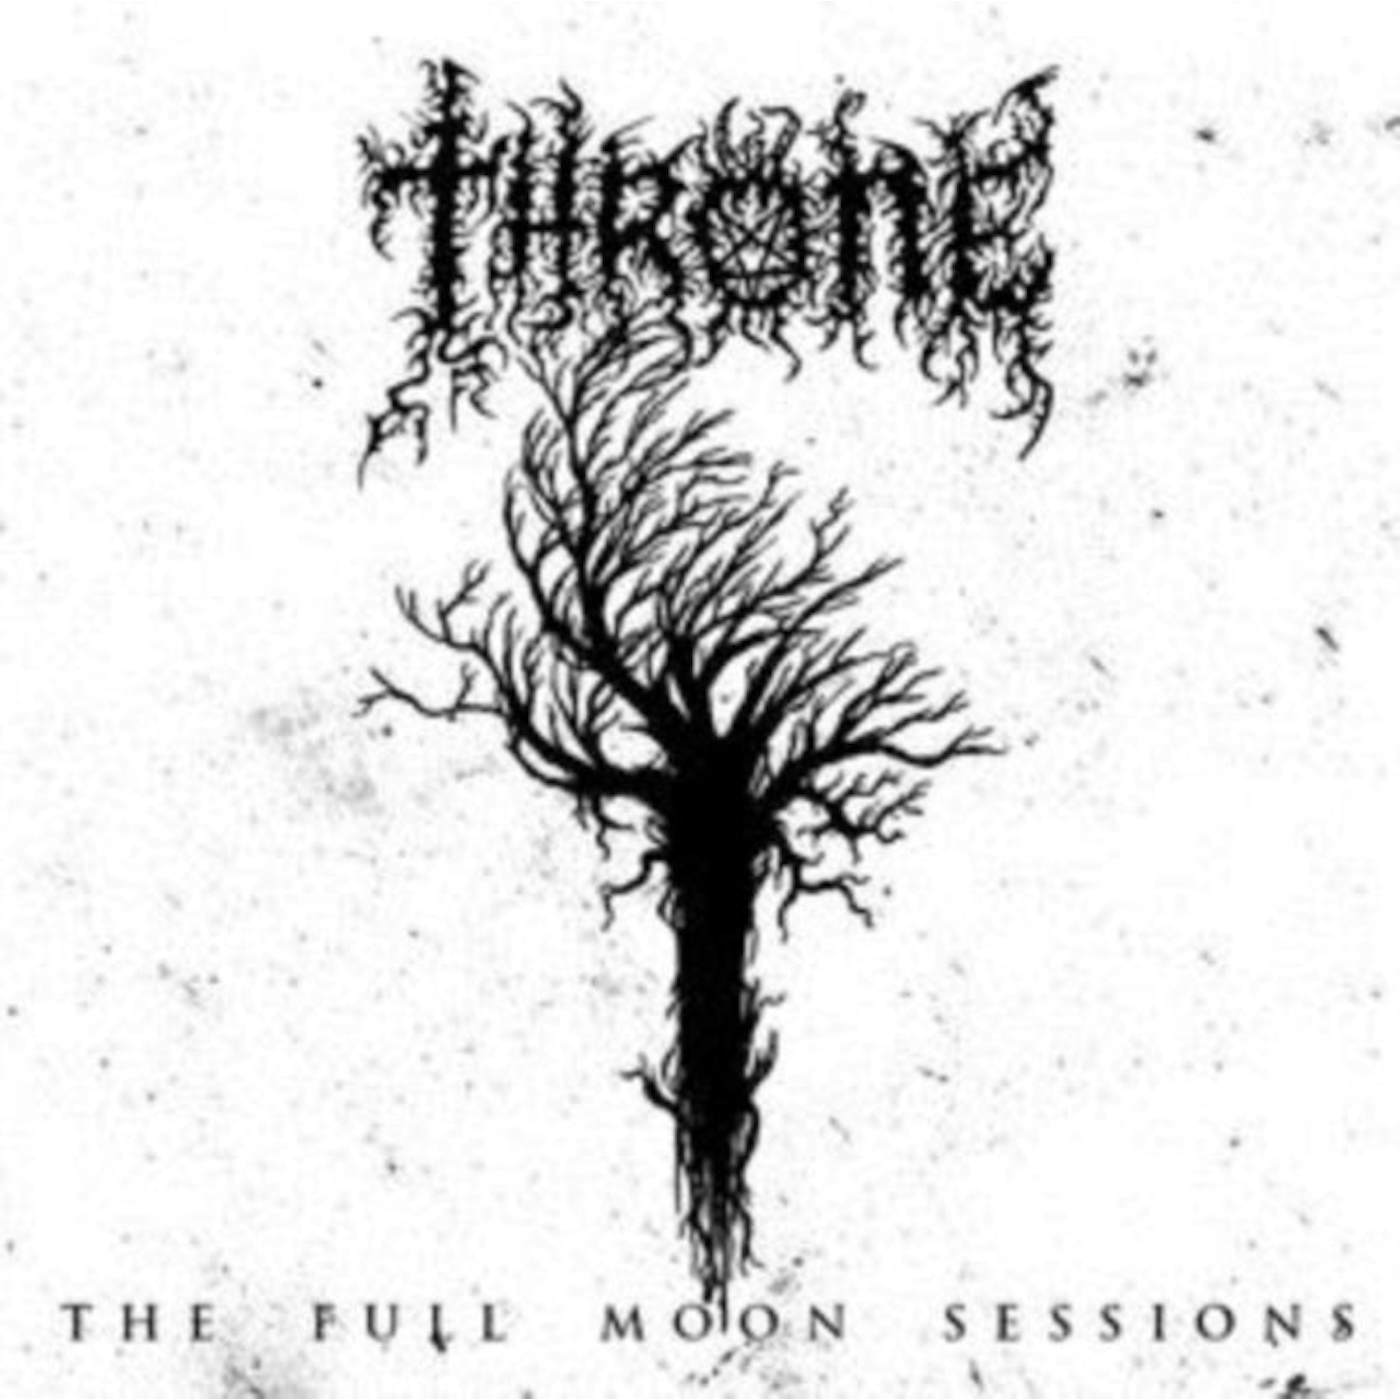 Throne CD - The Full Moon Sessions